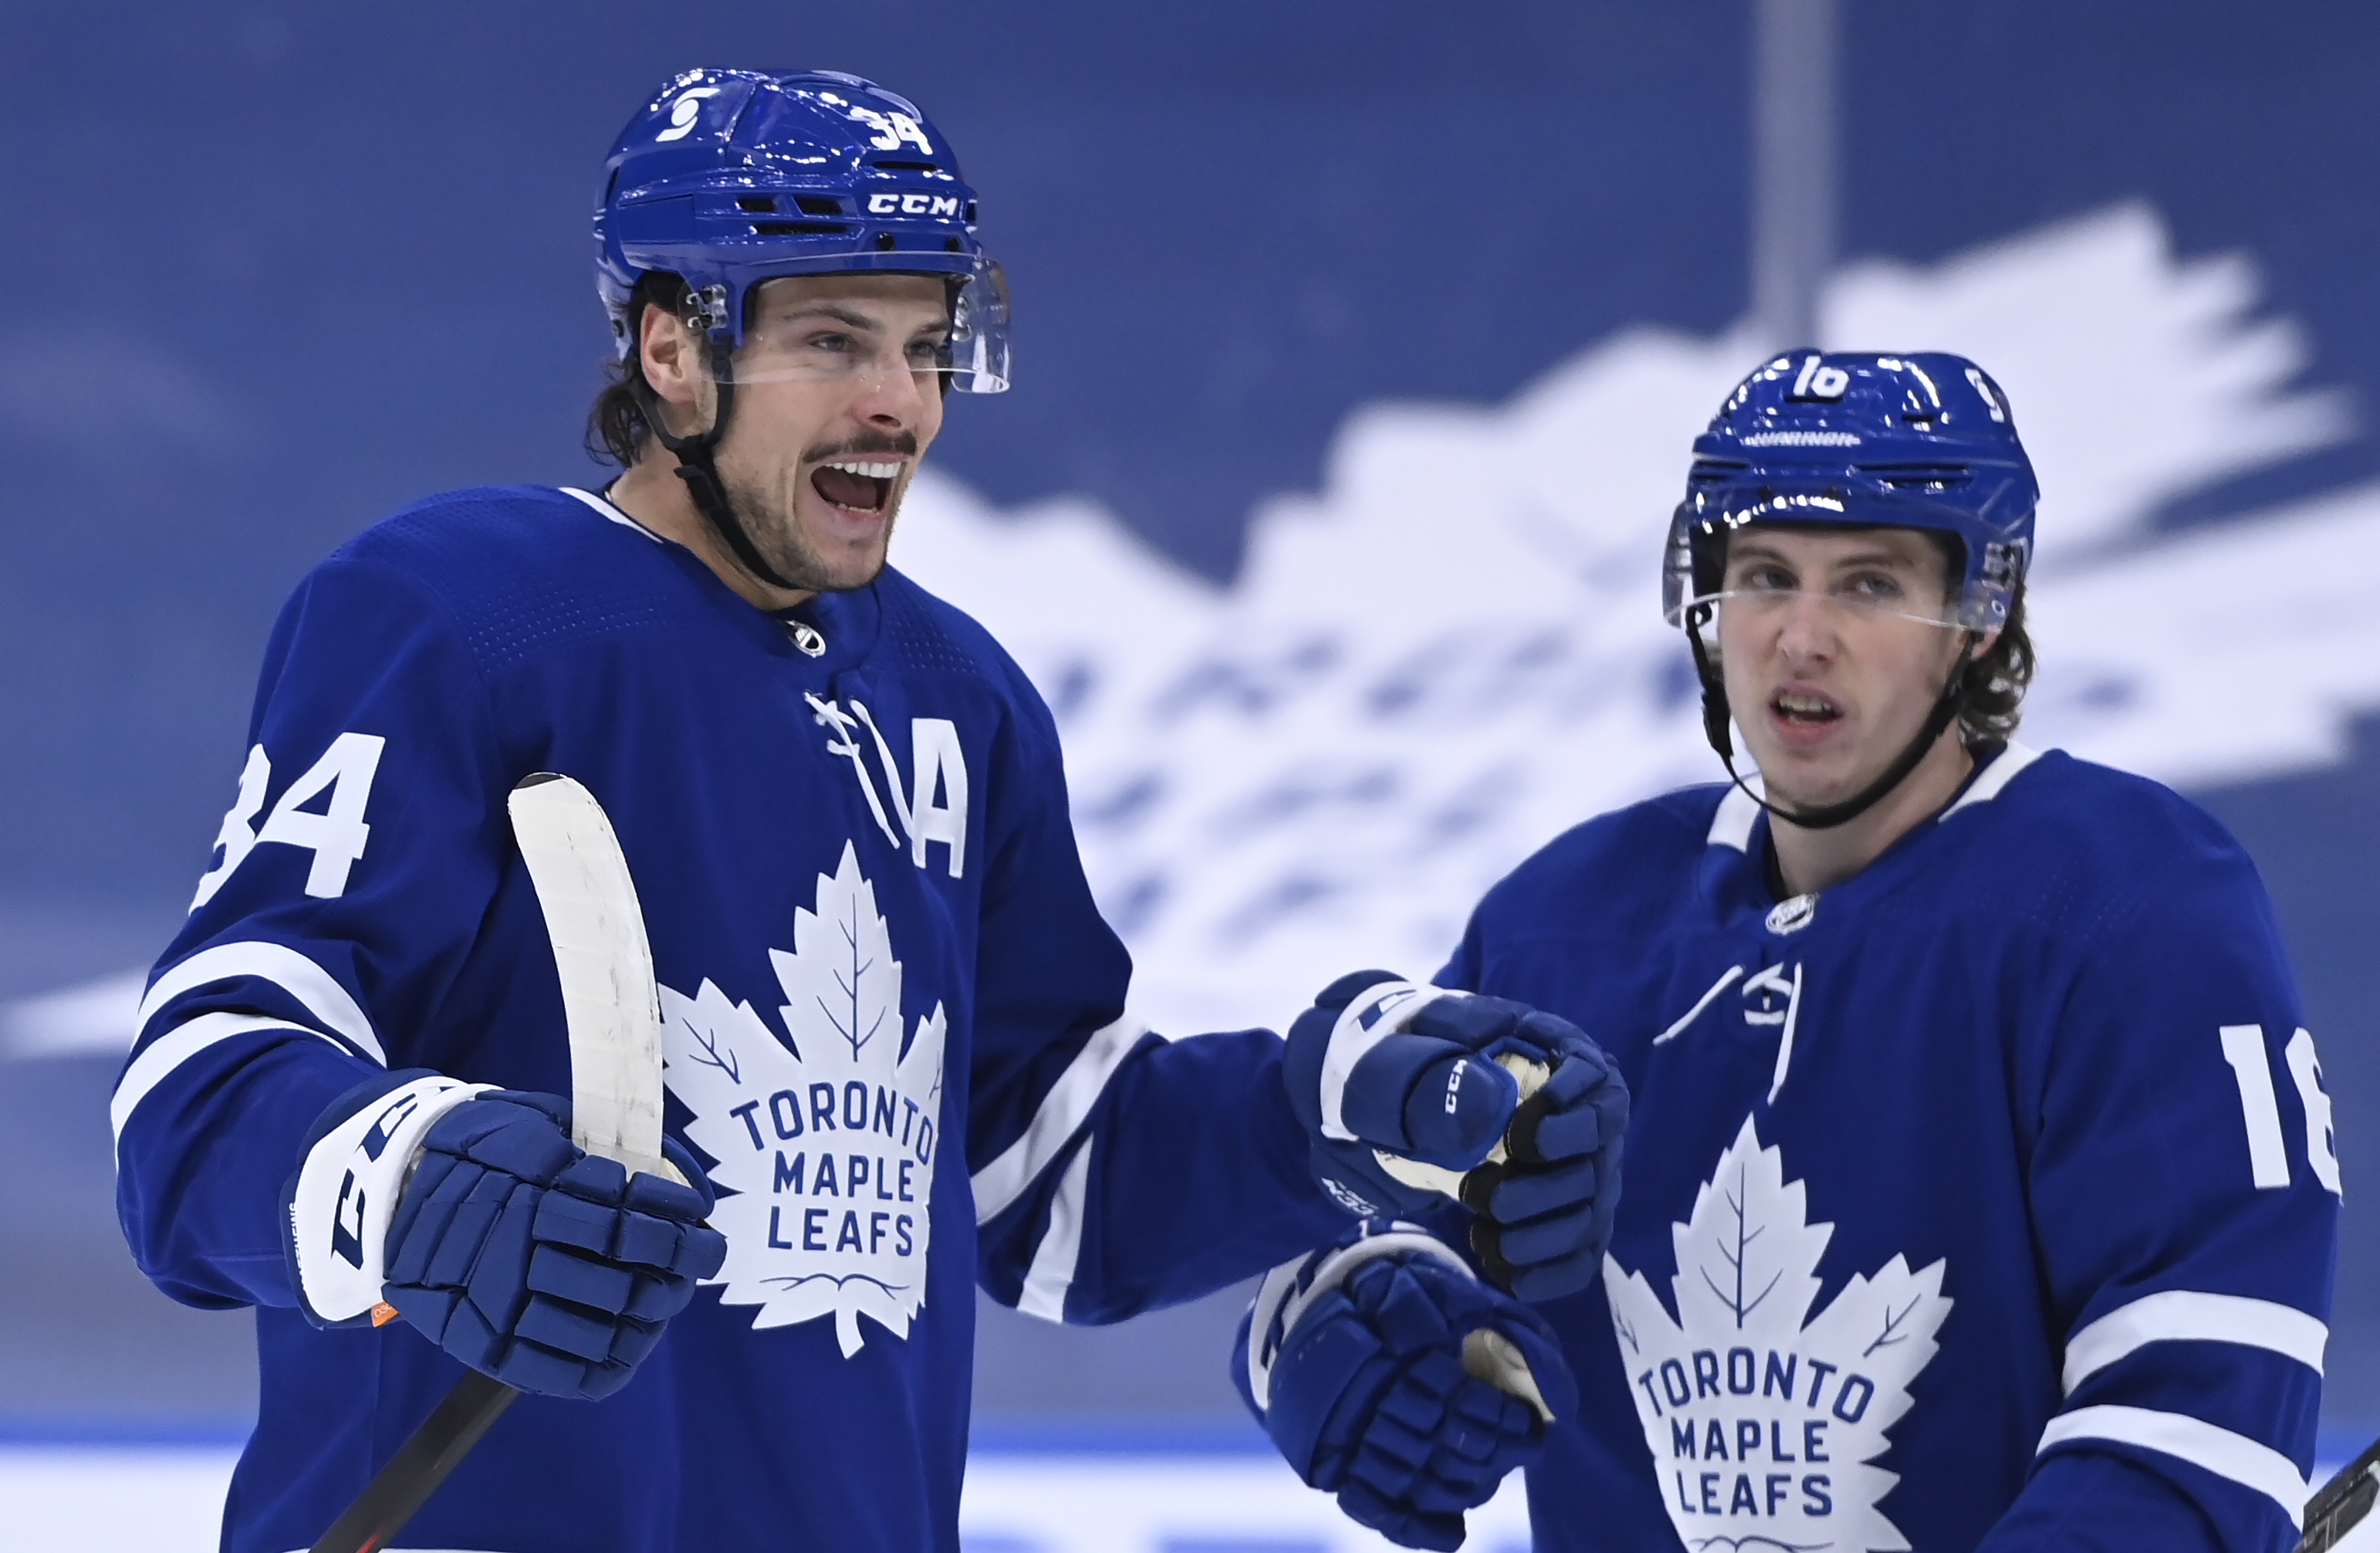 Toronto Maple Leafs: Are they leaning towards Auston Matthews as